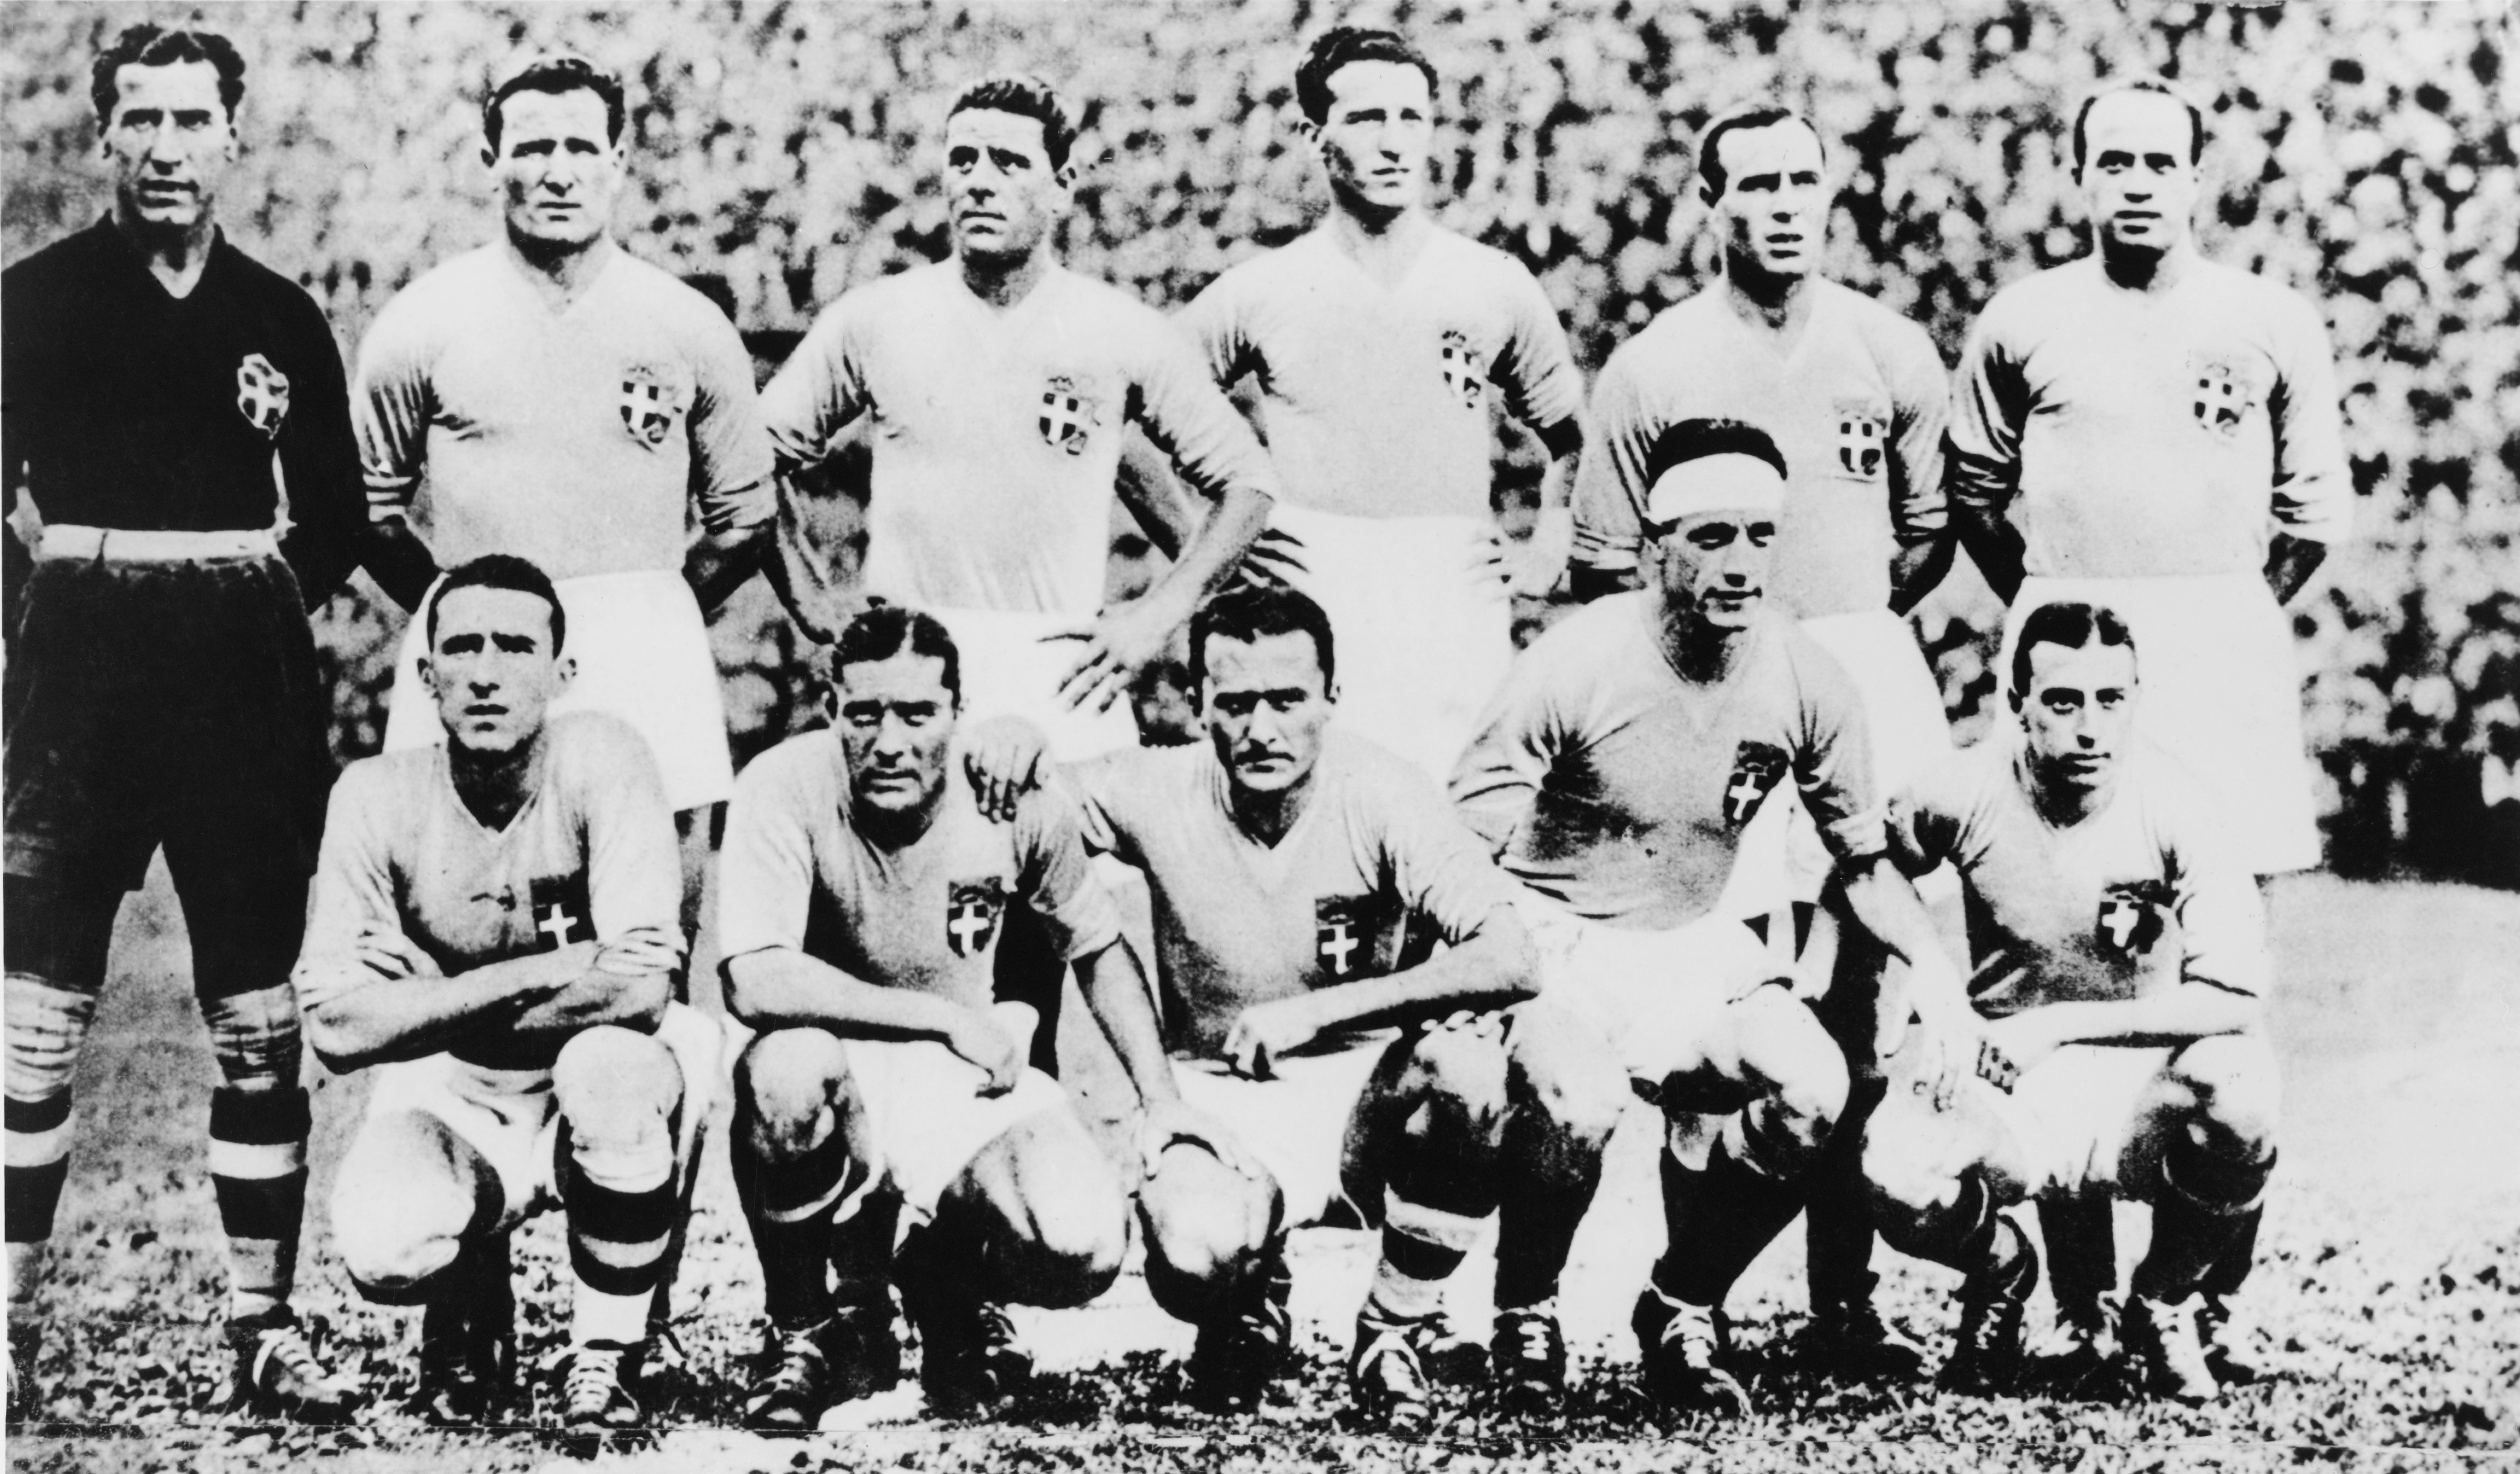 Gianpiero Combi (top left) and his Italy team-mates ahead of a game at the 1934 World Cup.